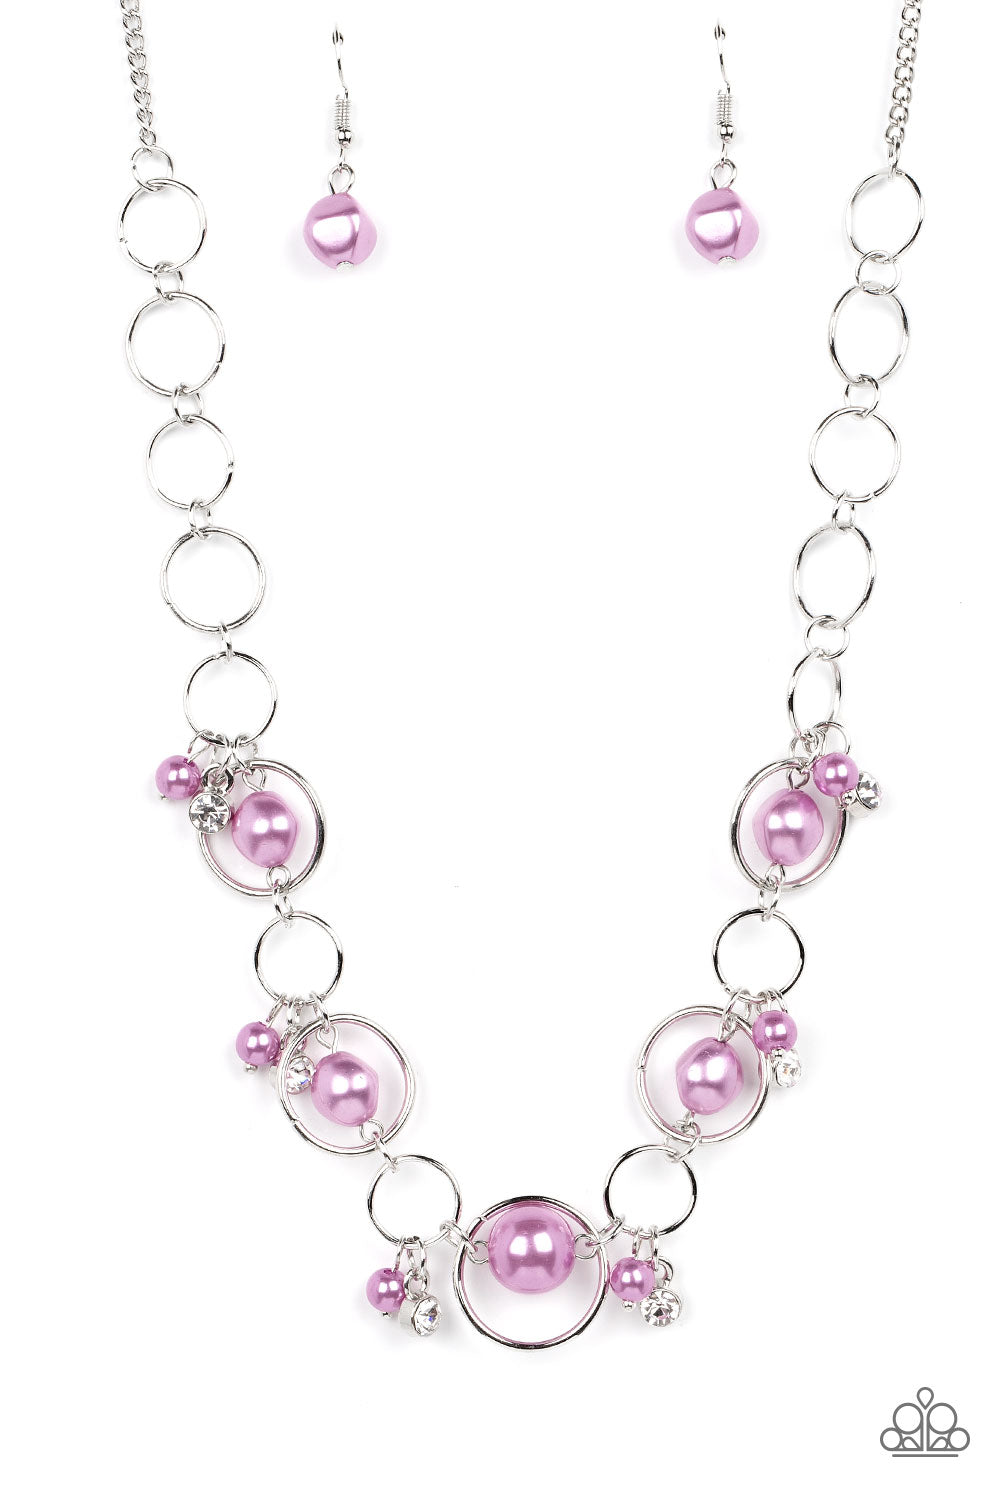 Think of the POSH-ibilities! - Purple Necklace